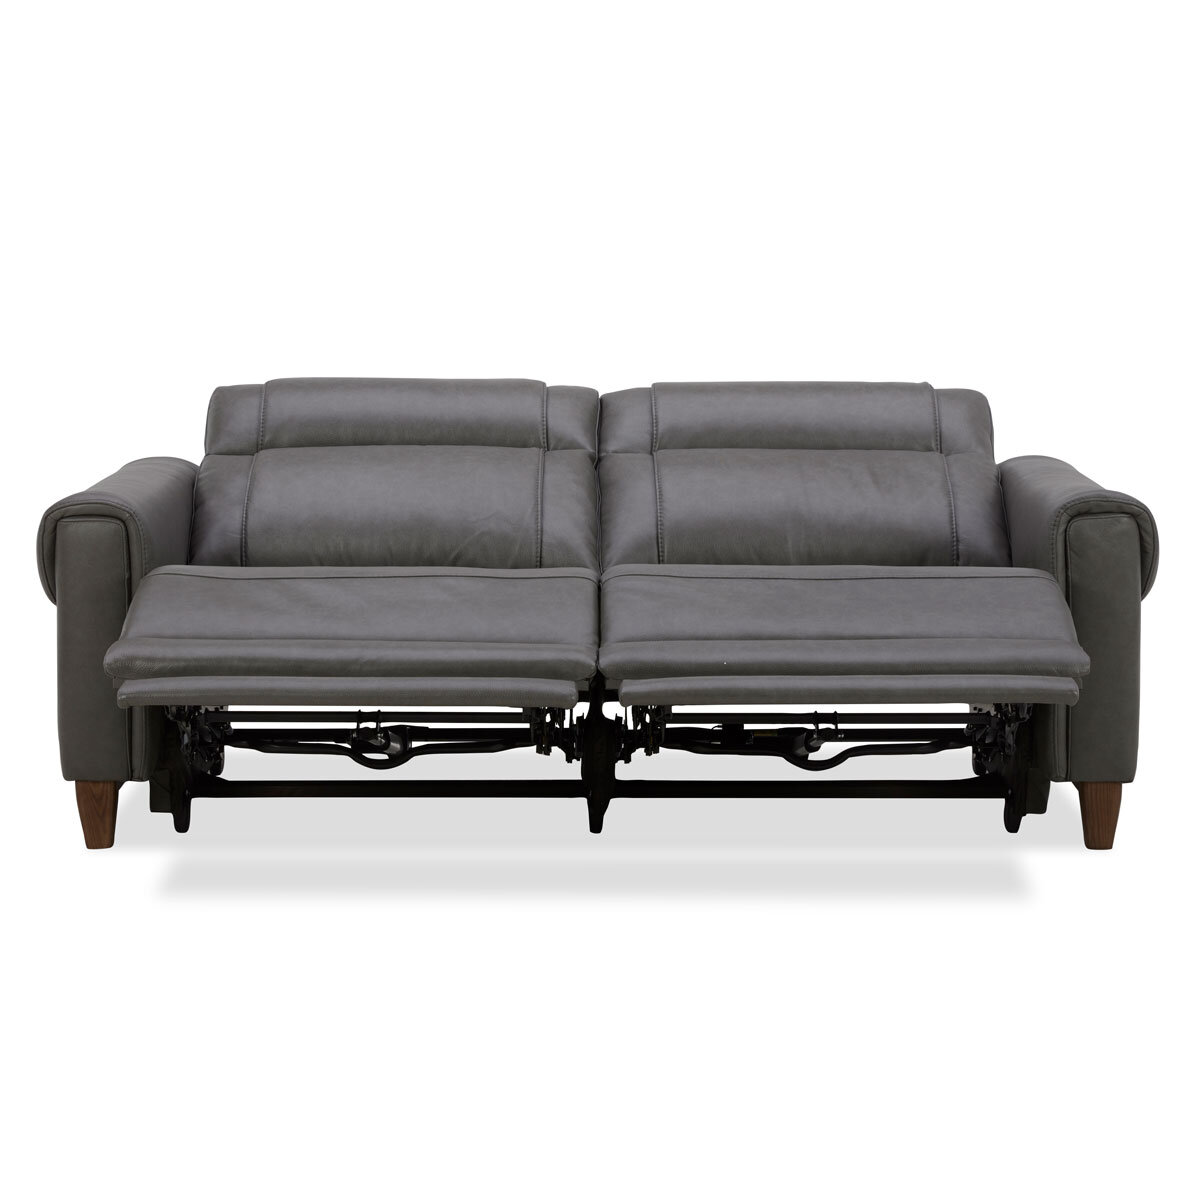 Aiden & Ivy Spencer Large 2 Seater Leather Sofa